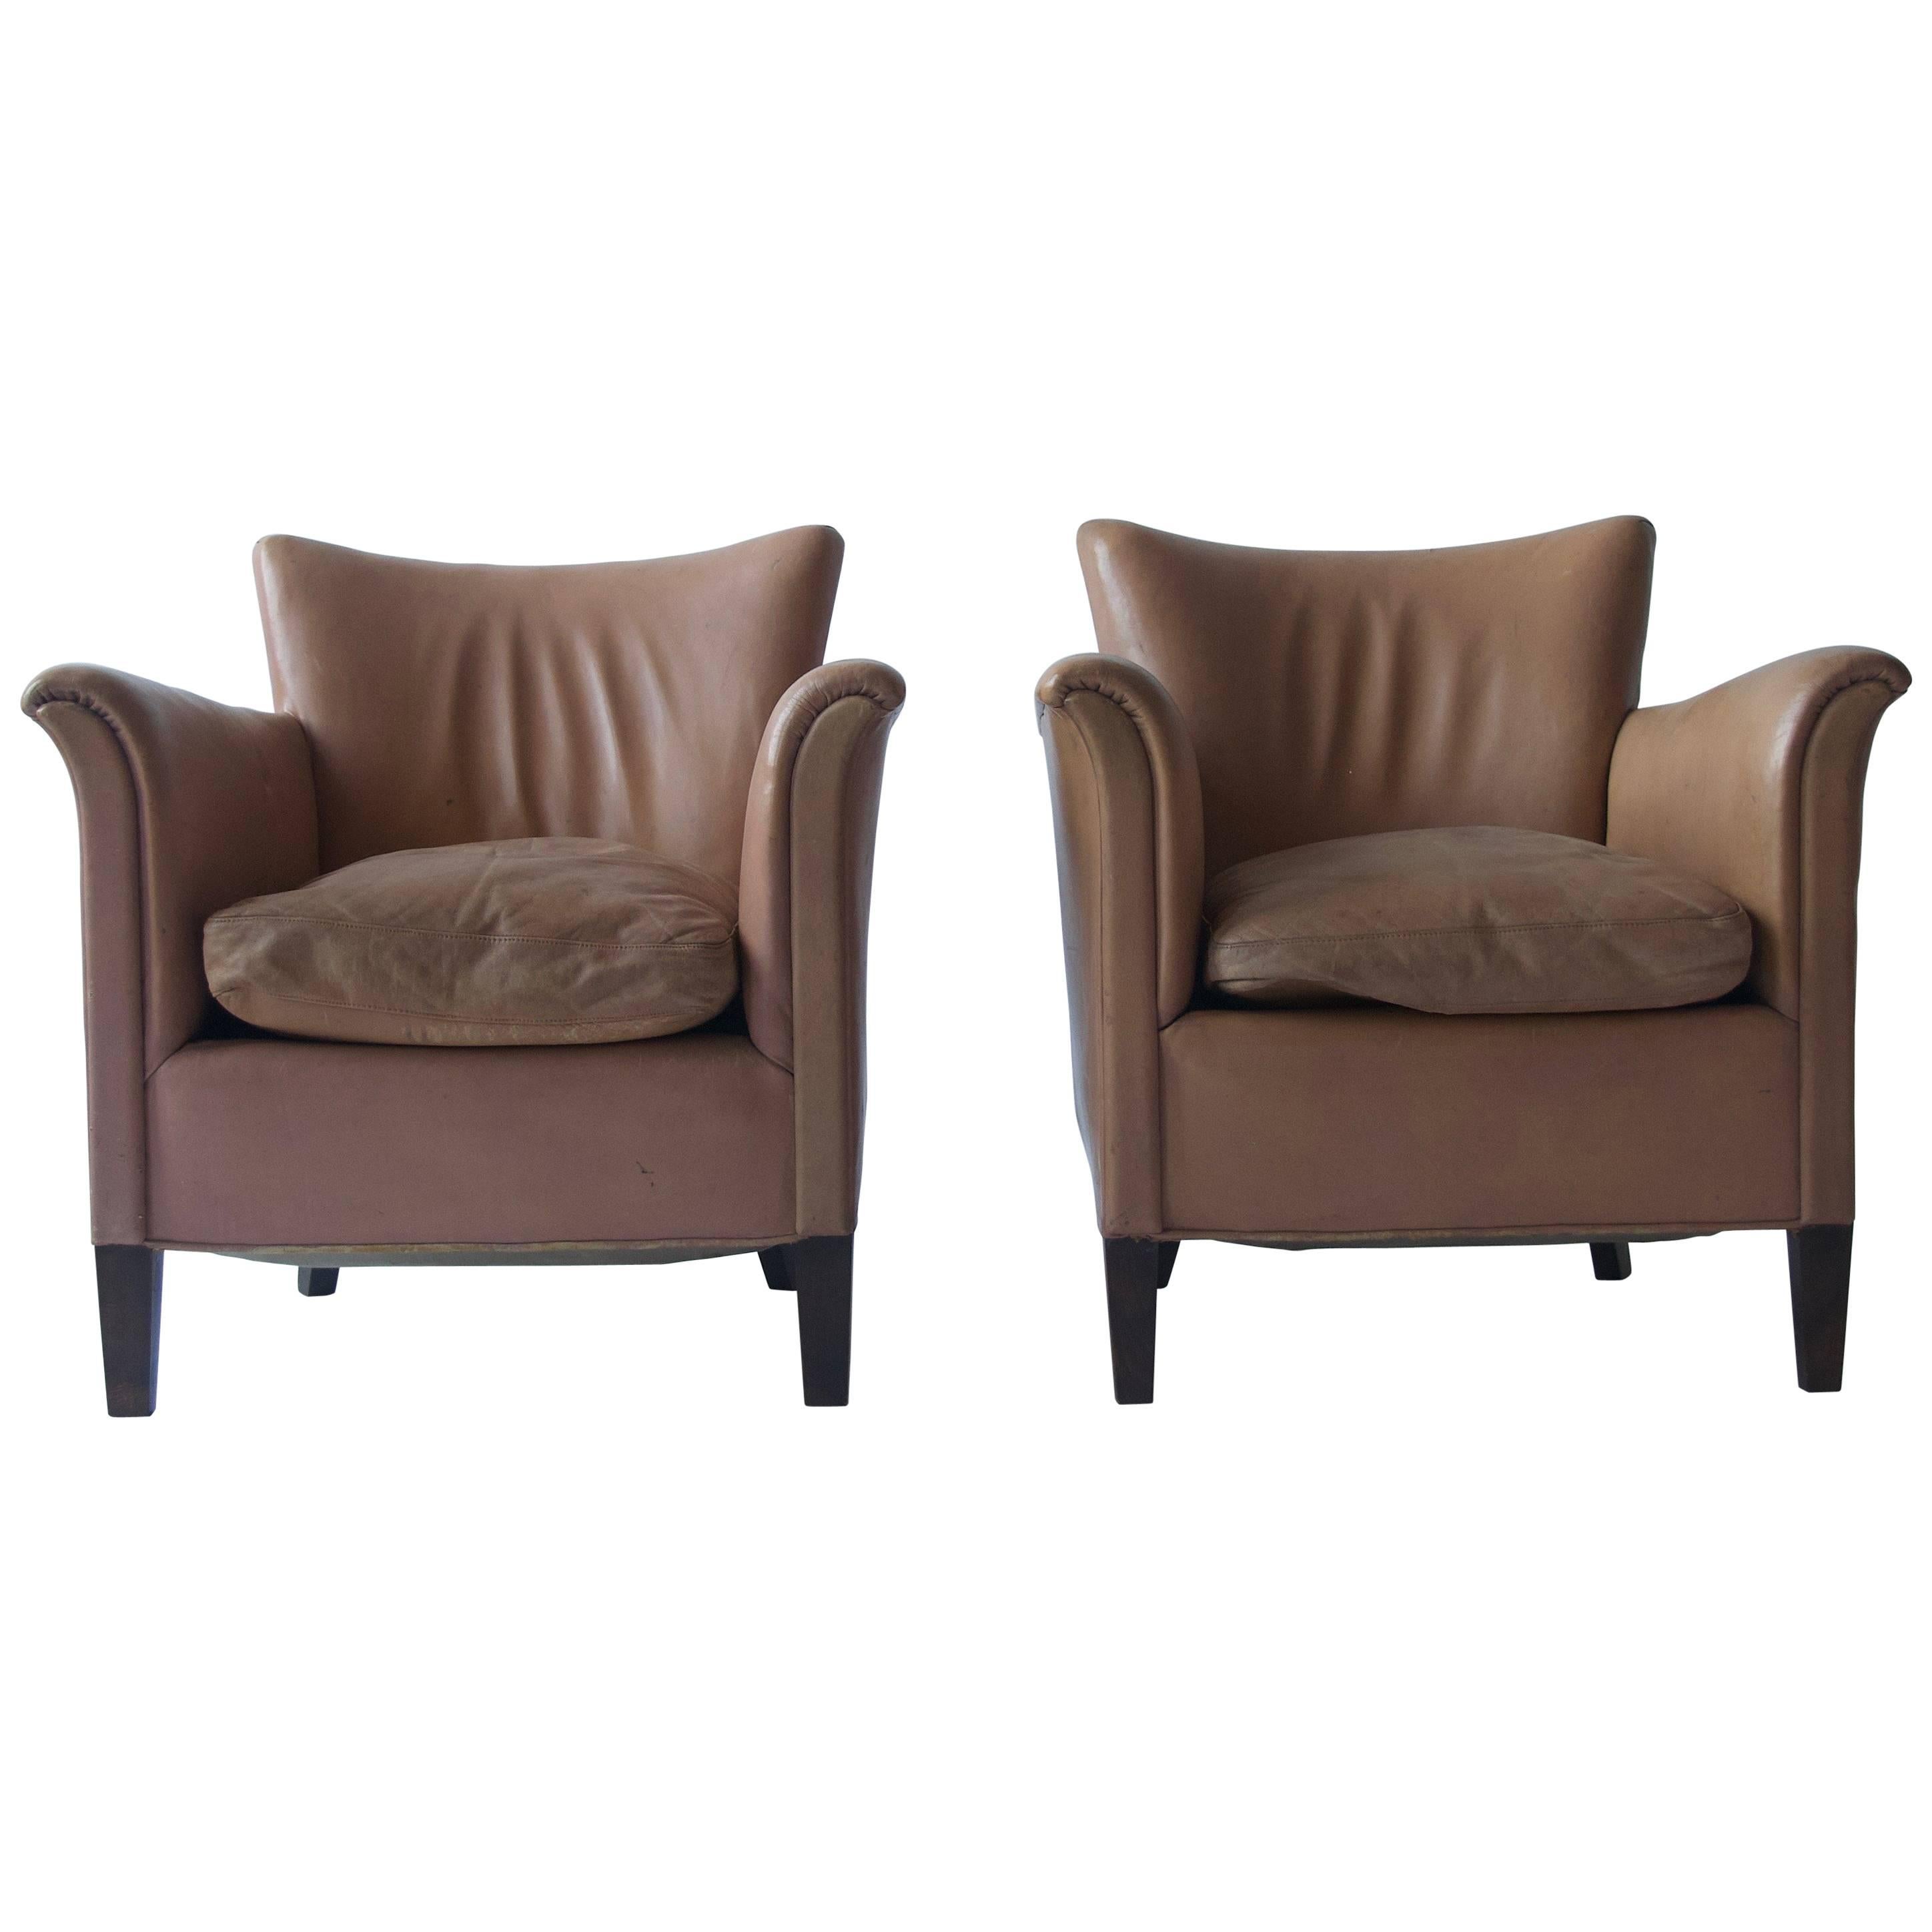 Pair of 1930s Danish Leather Club Chairs For Sale